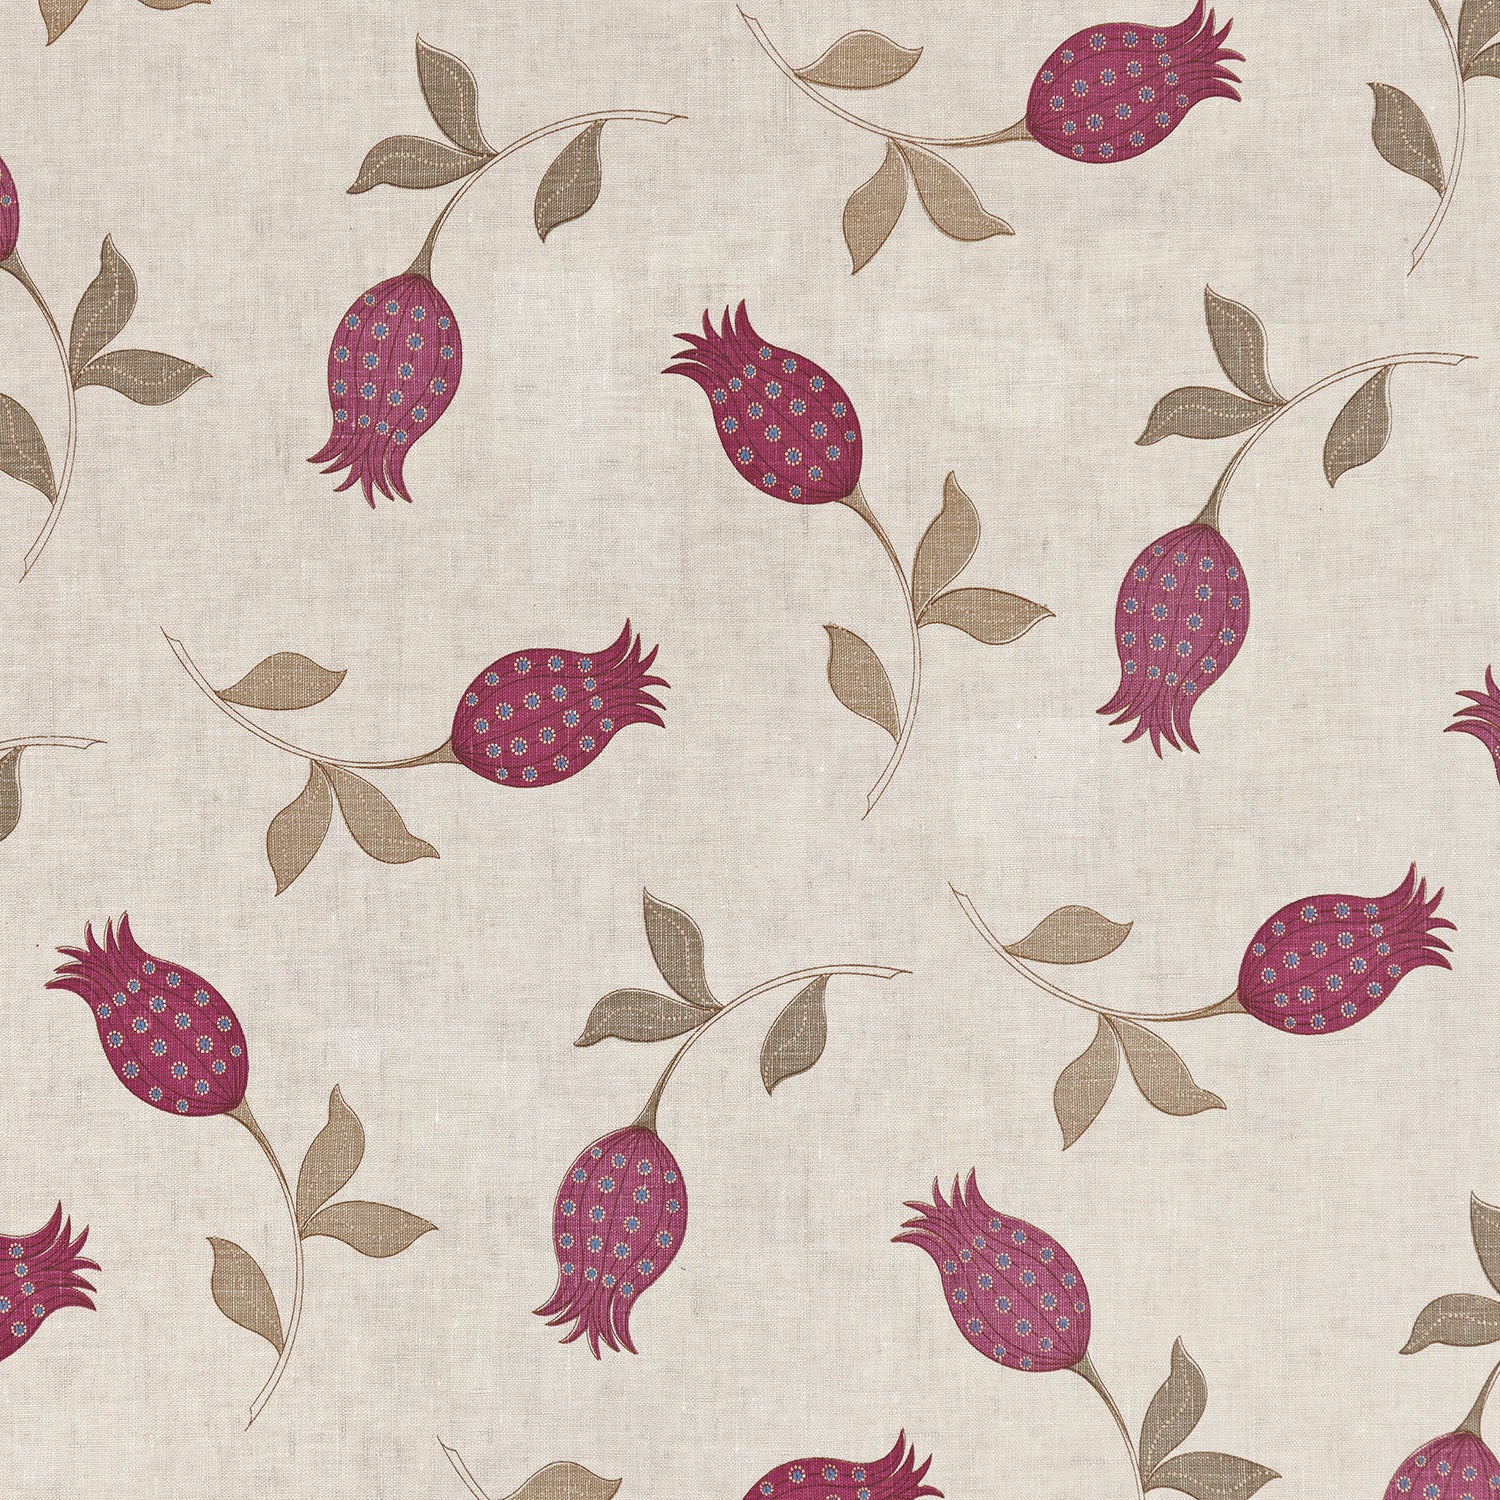 Detail of fabric with a small-scale tulip print in shades of magenta and tan on a cream field.